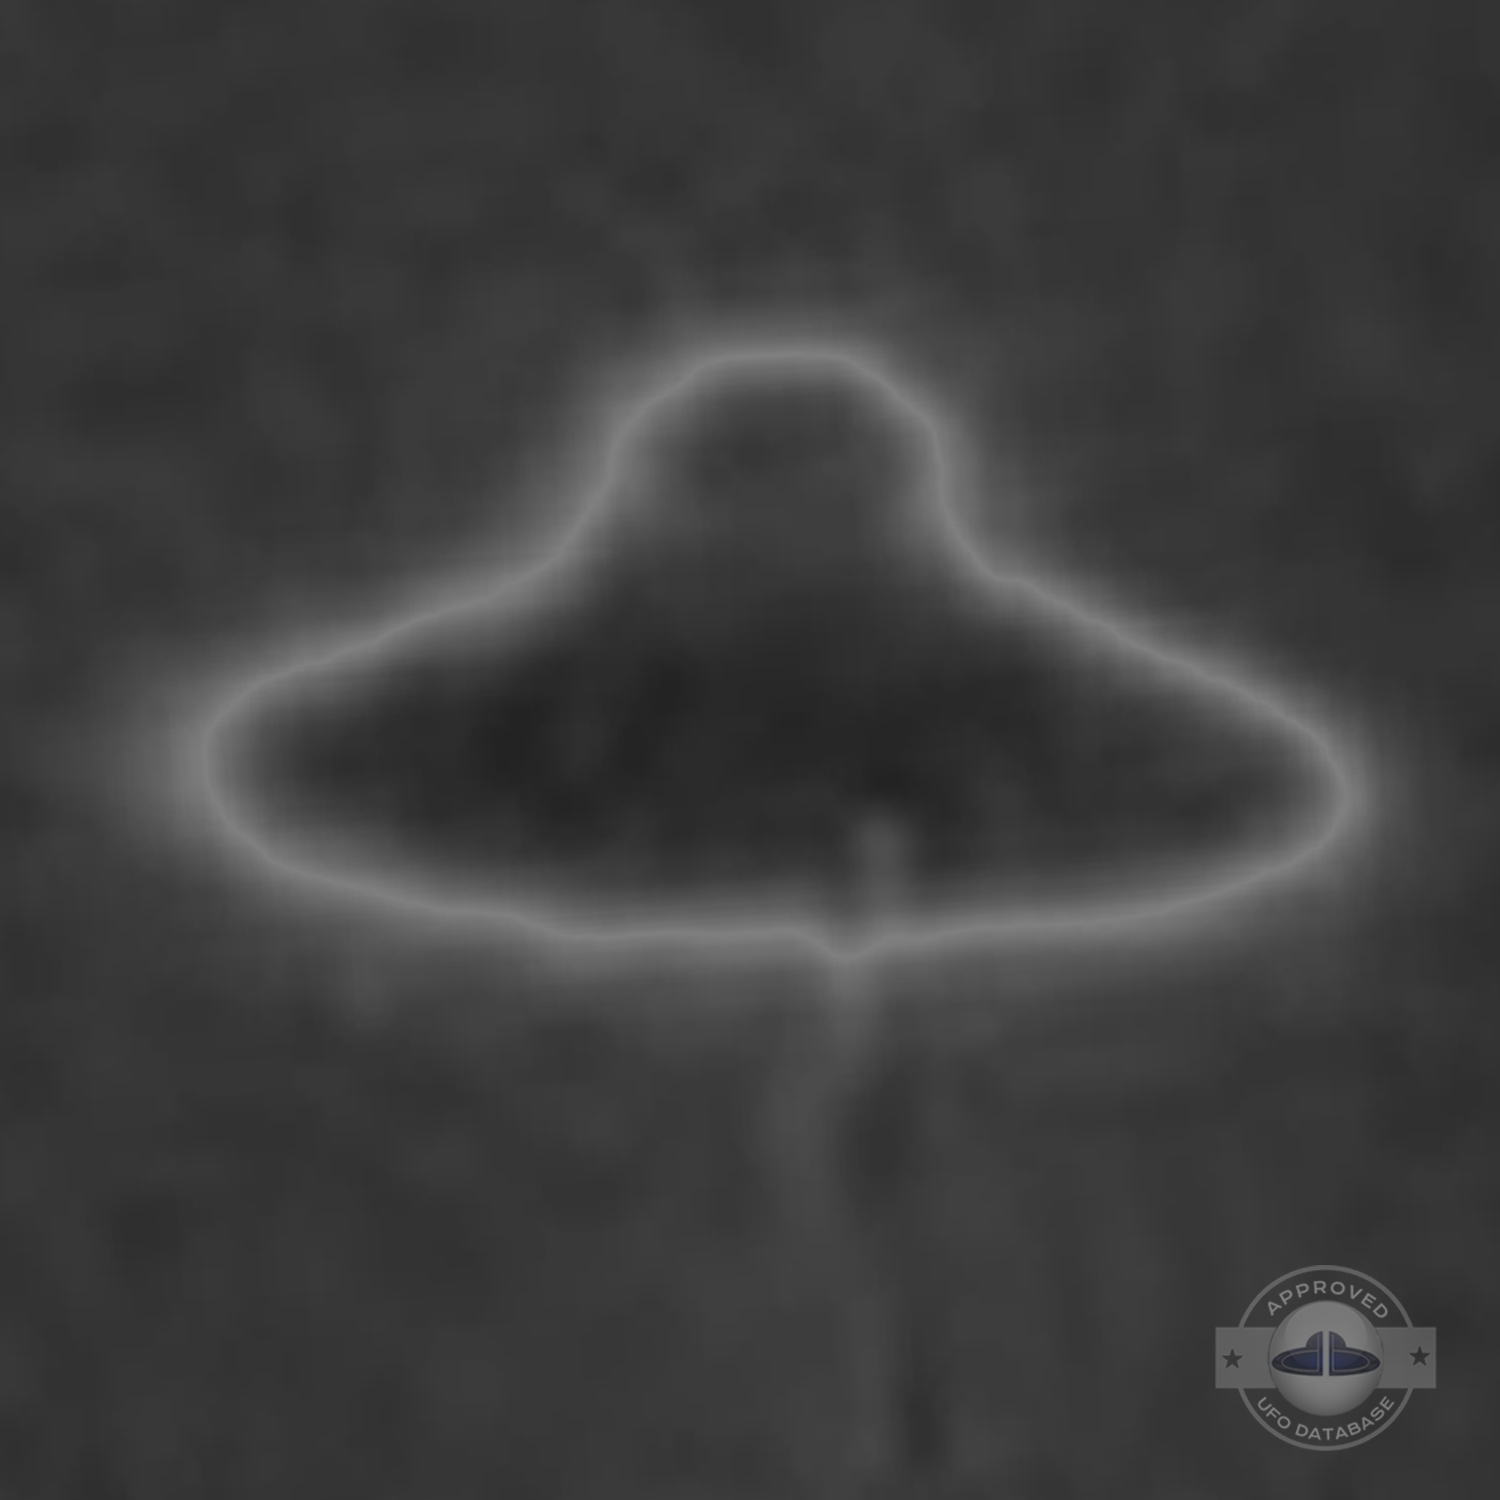 Saucer with Dome UFO shape moving in a zigzag going down Nagoya Japan UFO Picture #153-9